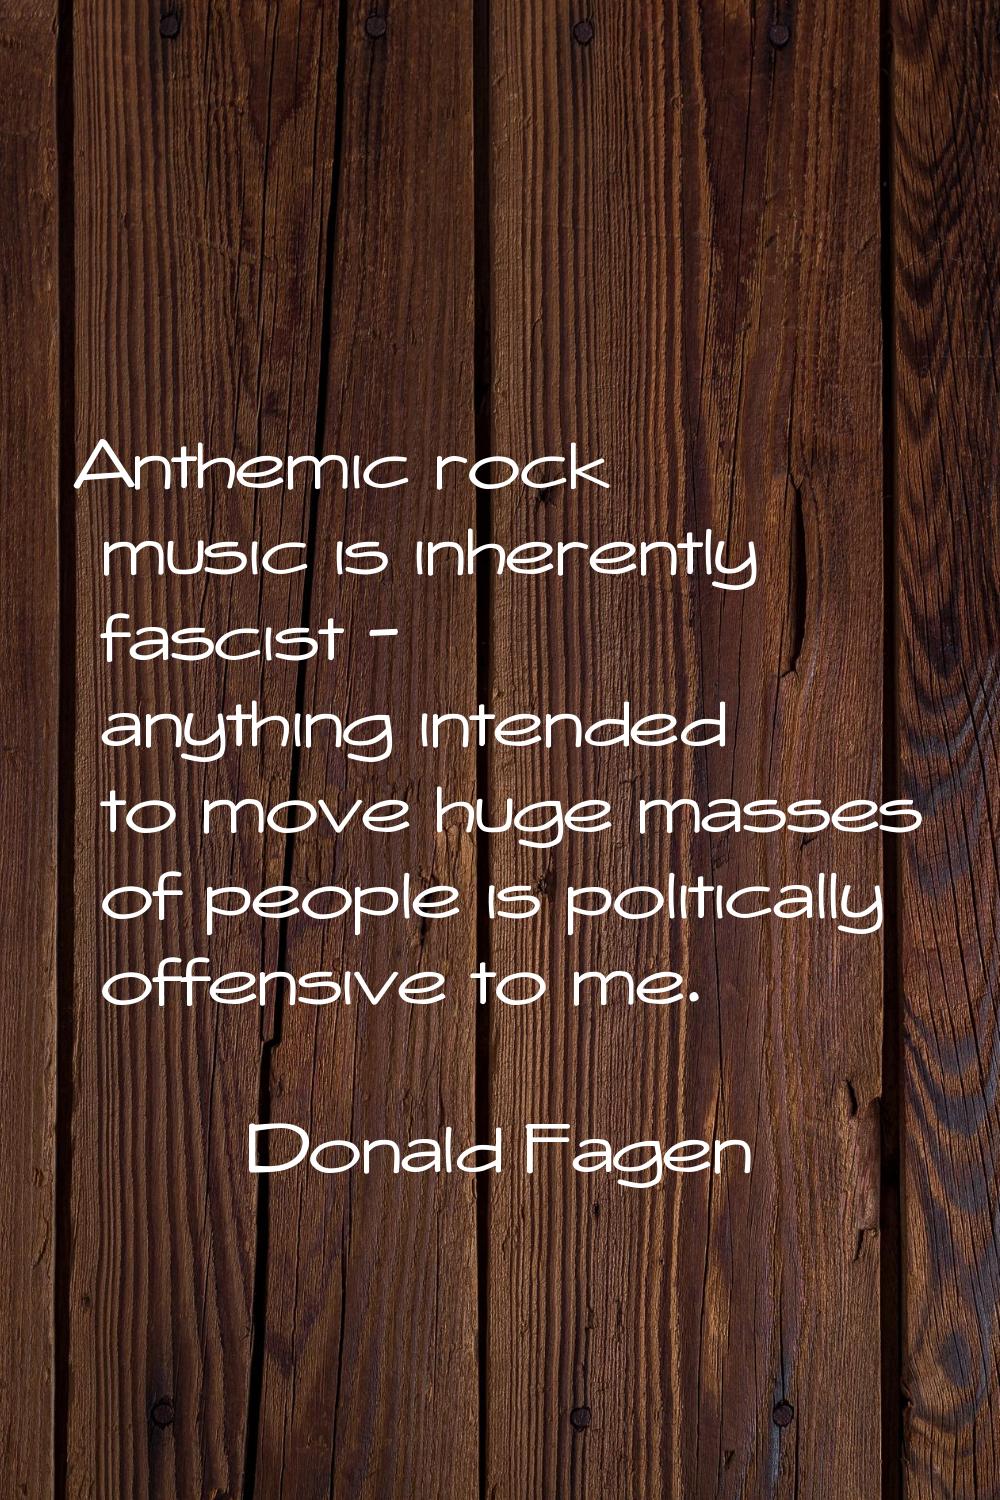 Anthemic rock music is inherently fascist - anything intended to move huge masses of people is poli